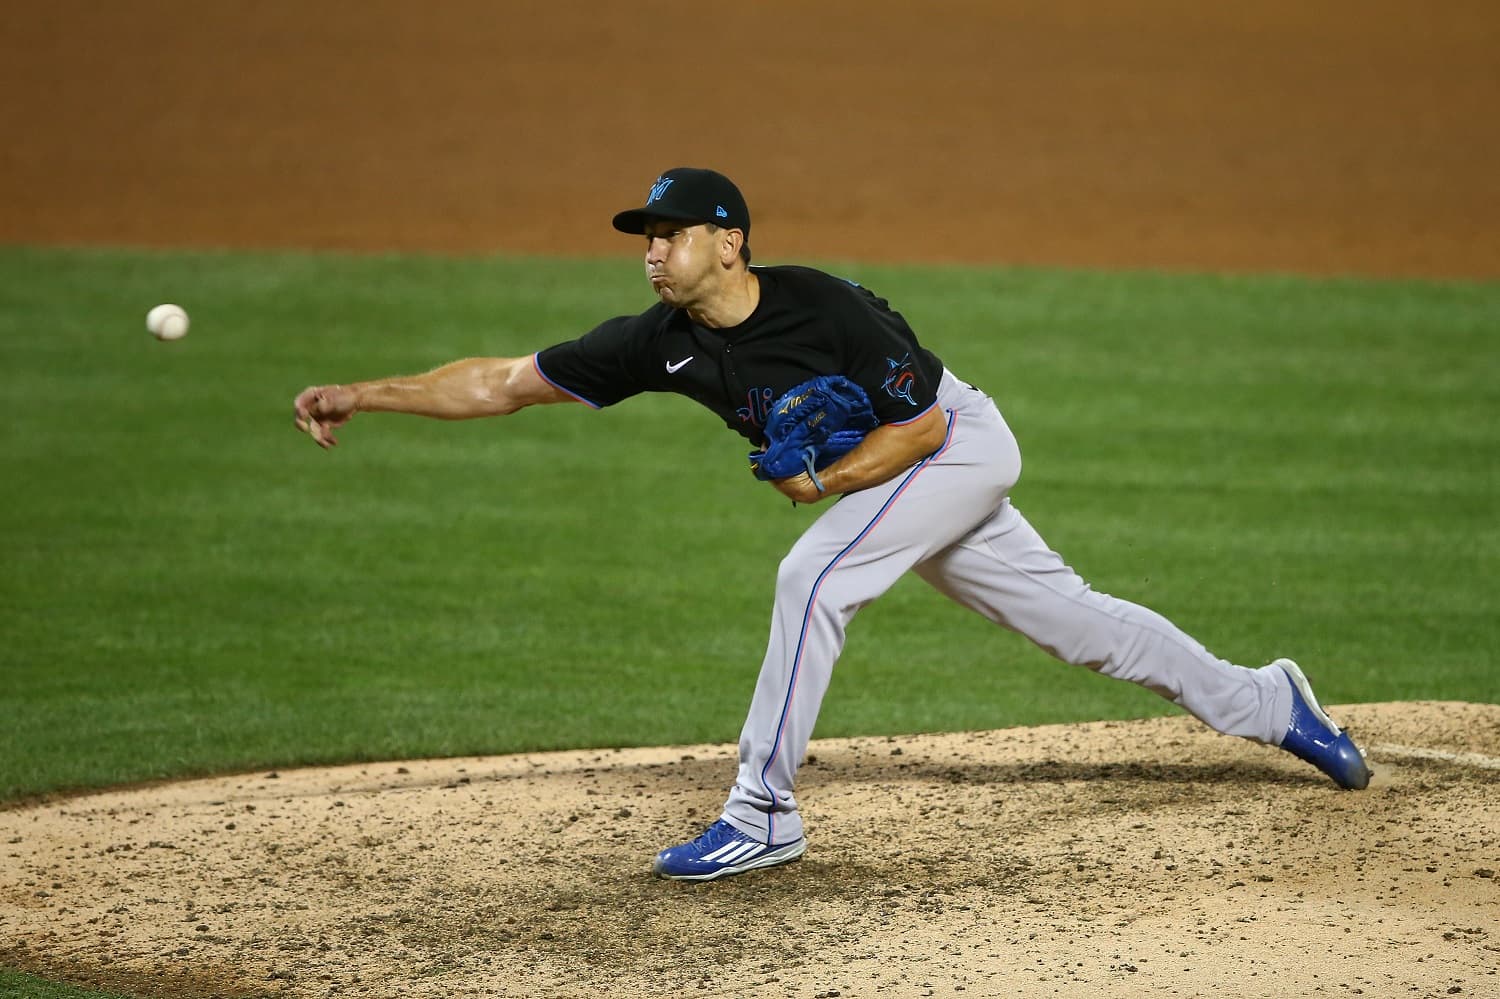 Switch-pitcher Pat Venditte of the Miami Marlins in action against the New York Mets at Citi Field on Aug. 8, 2020.